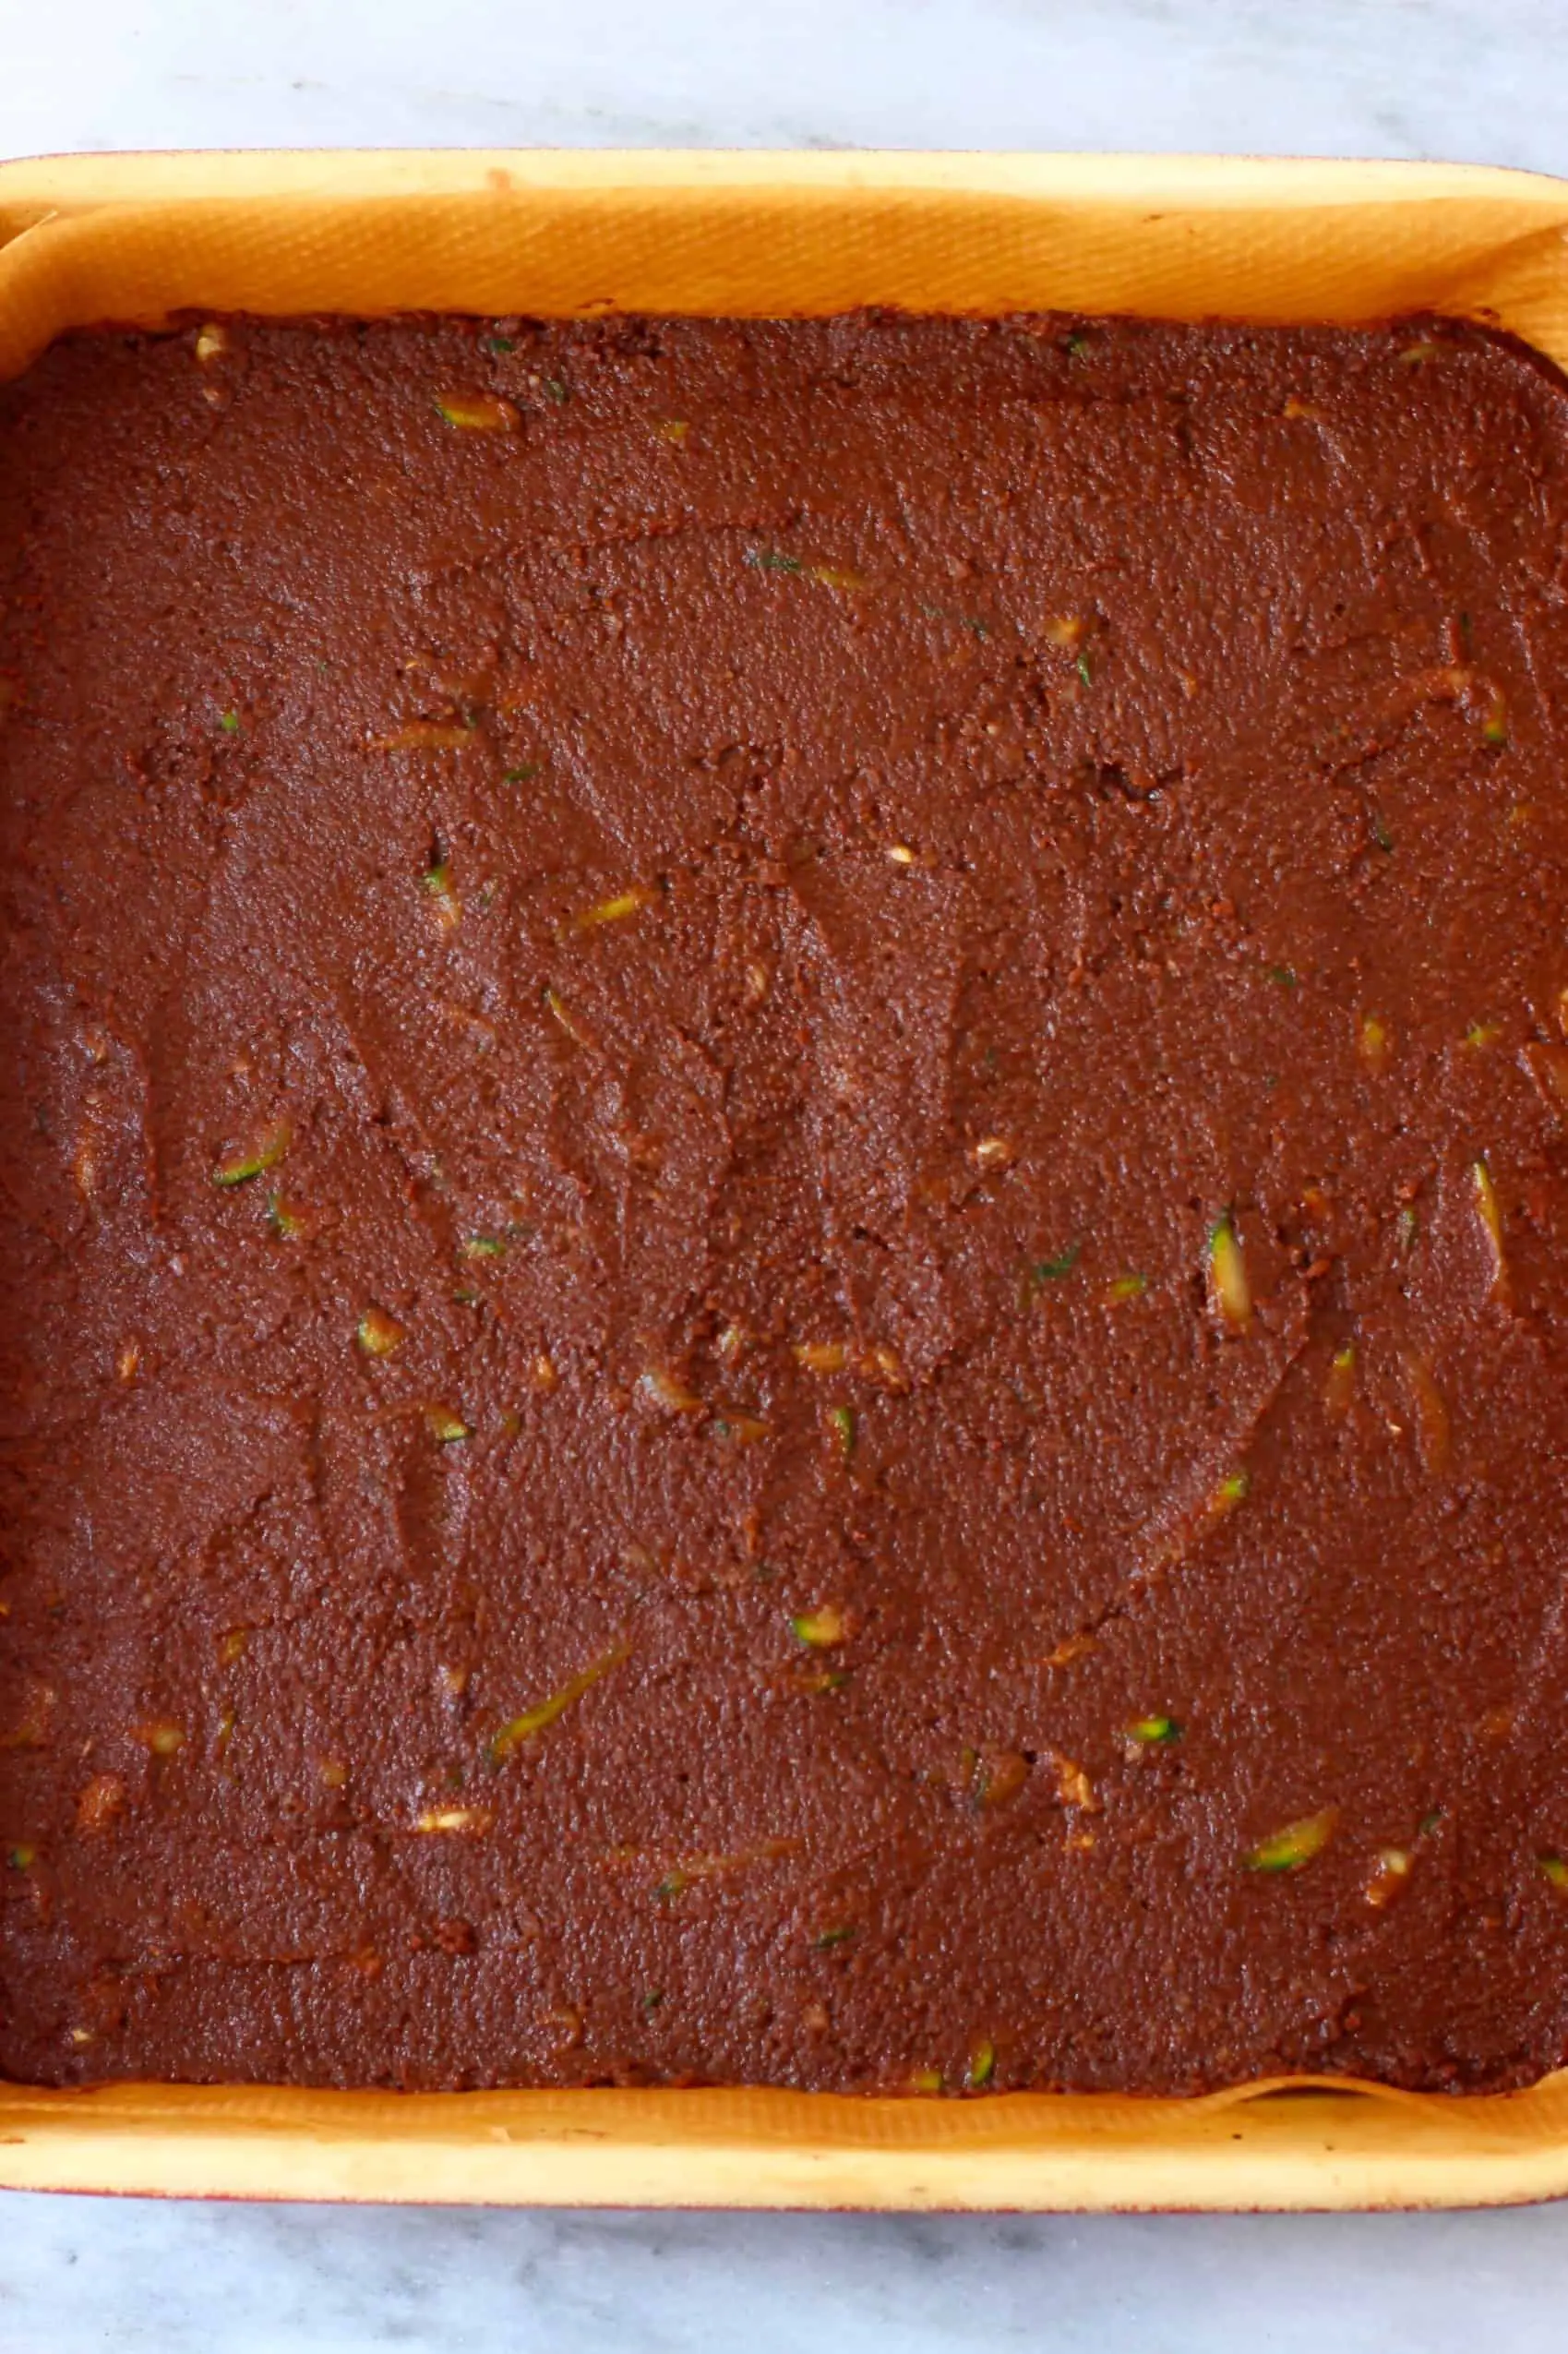 Raw vegan zucchini brownie batter in a square baking tray against a marble background